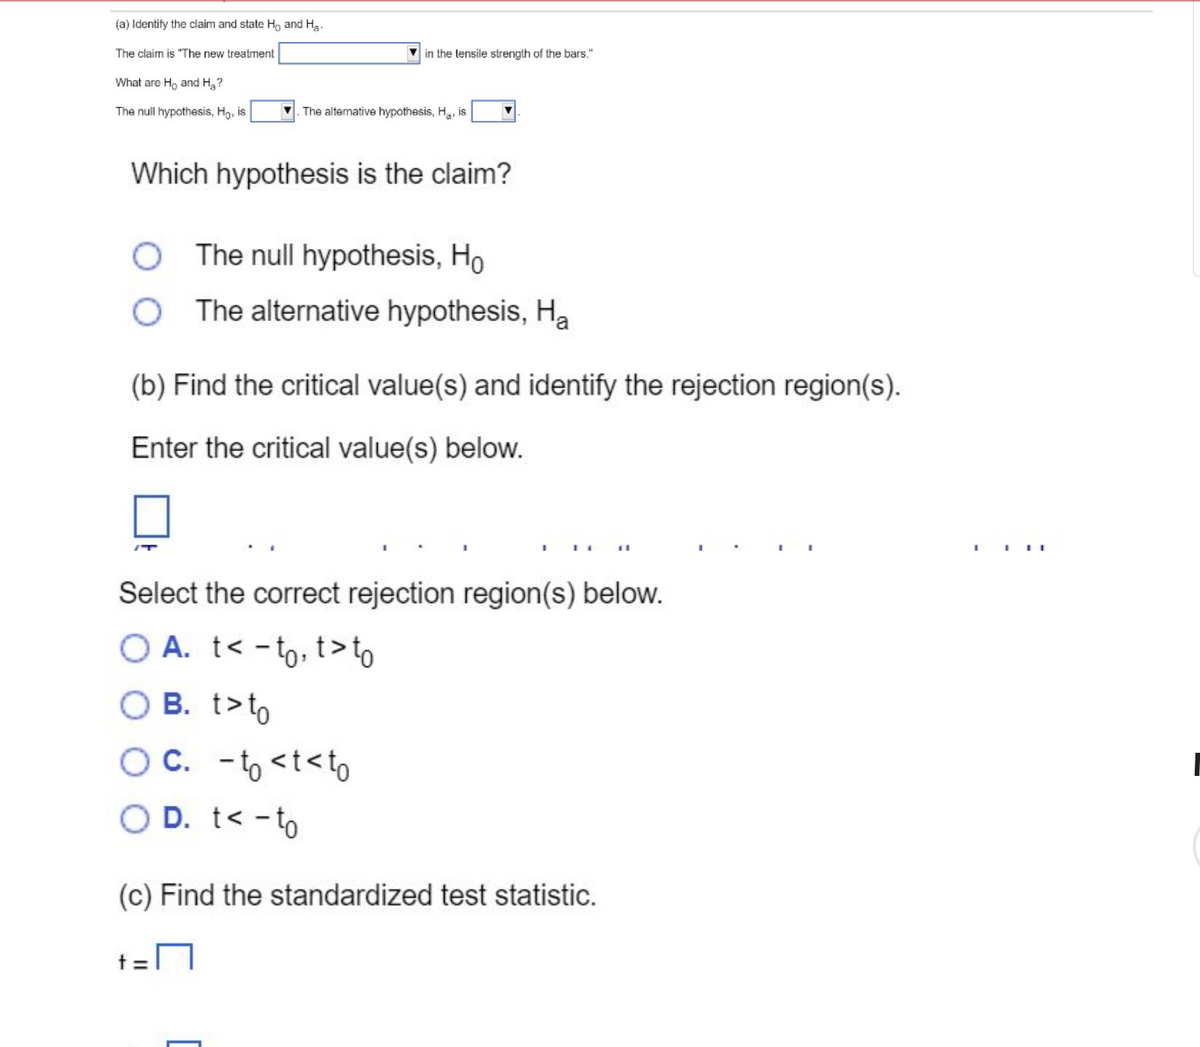 (a) Identify the claim and state Ho and Ha
The claim is "The new treatment
What are Ho and H₂?
The null hypothesis, Ho, is
in the tensile strength of the bars."
Which hypothesis is the claim?
/T
The alternative hypothesis, H₂, is
(b) Find the critical value(s) and identify the rejection region(s).
Enter the critical value(s) below.
The null hypothesis, Ho
The alternative hypothesis, Ha
t =
Select the correct rejection region(s) below.
OA. t< - to, t>to
B. t> to
c. -to <t<to
O D. t< - to
(c) Find the standardized test statistic.